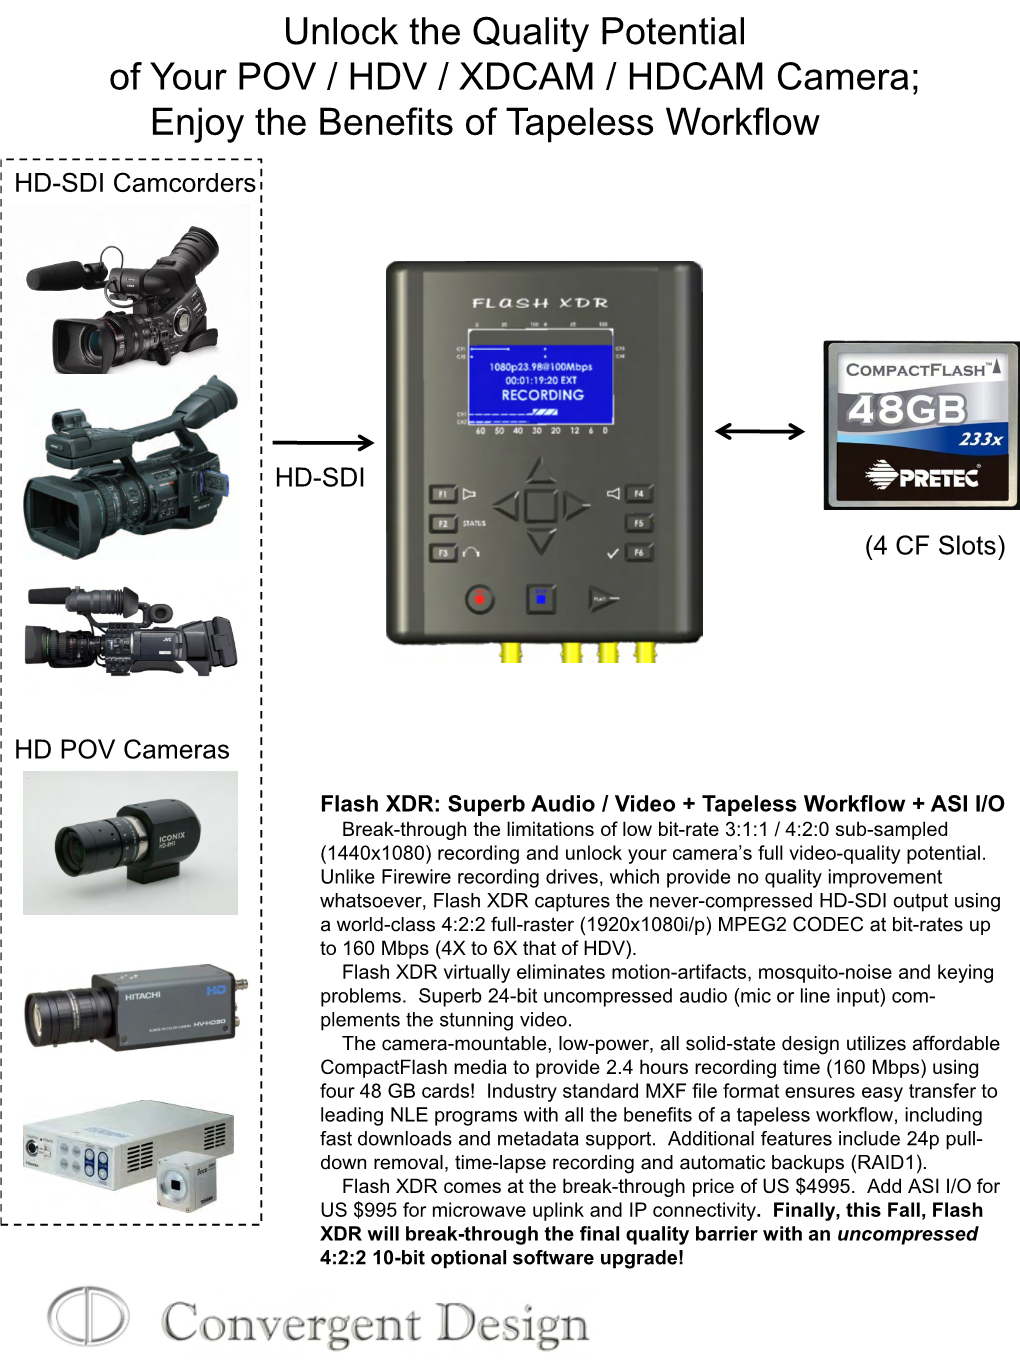 Unlock the Quality Potential of Your POV / HDV / XDCAM / HDCAM Camera; Enjoy the Benefits of Tapeless Workflow